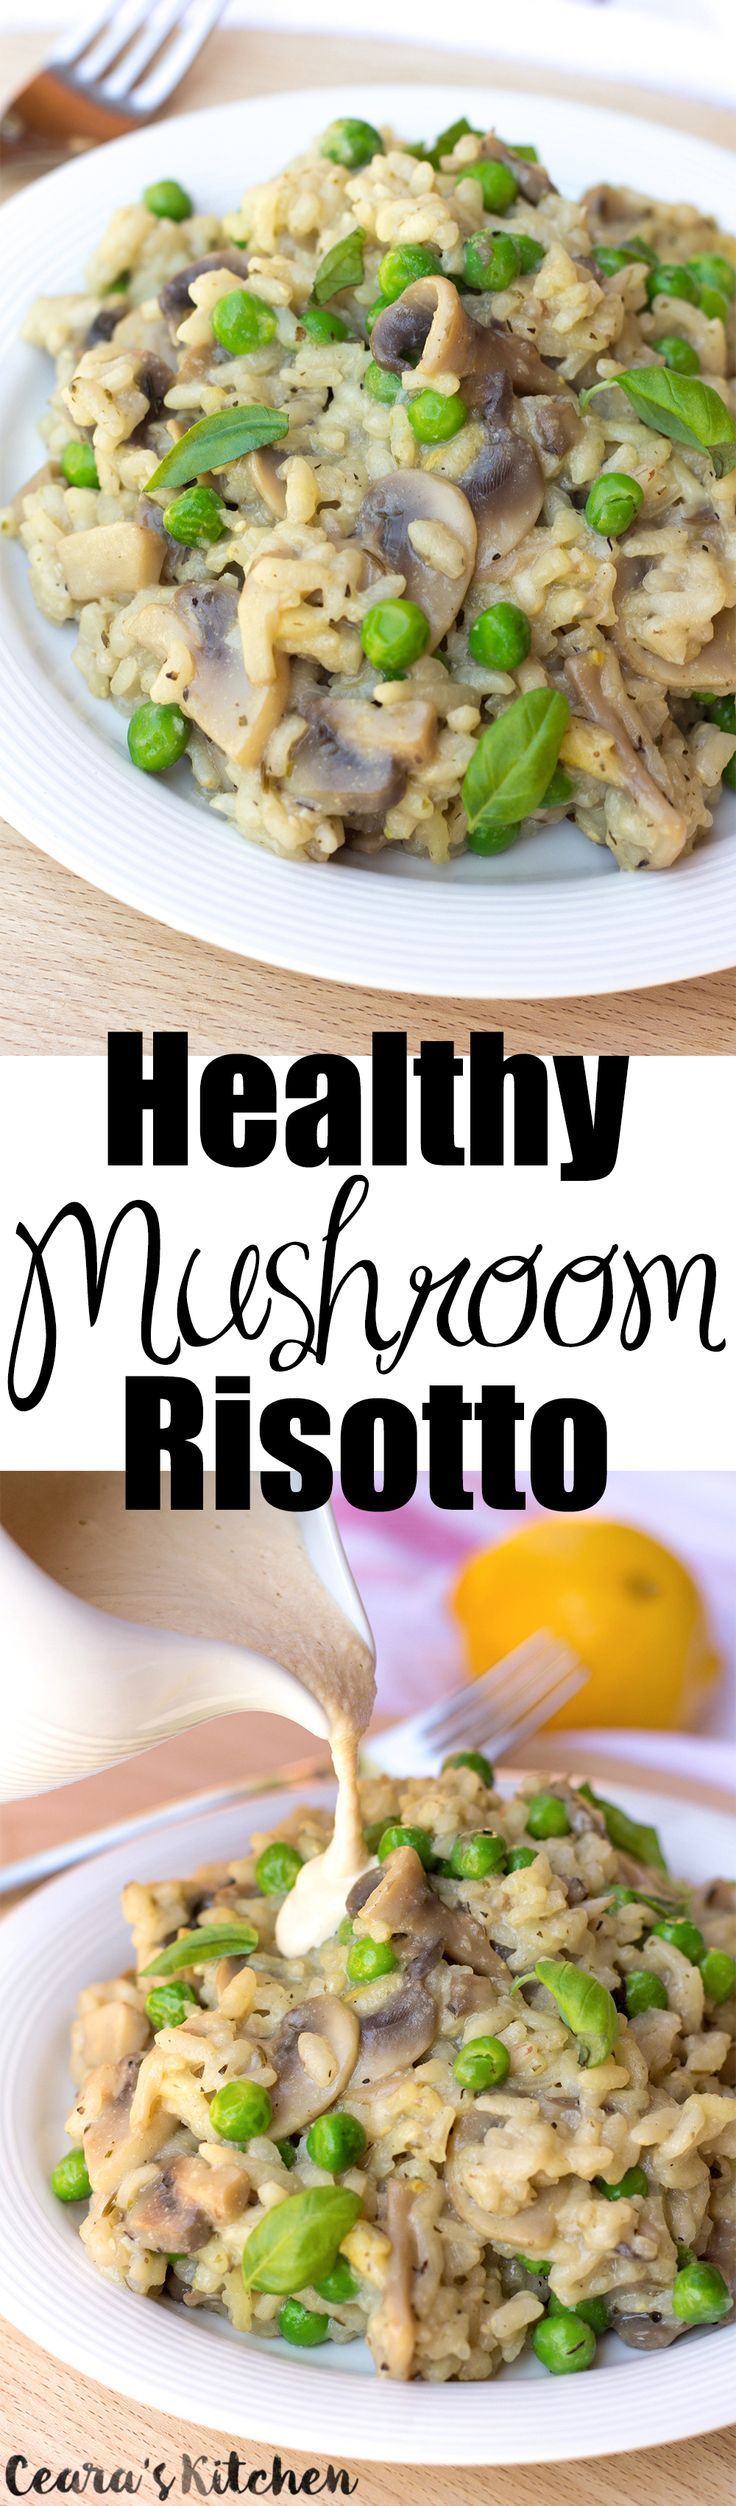 Healthy Mushroom Risotto – a one pot, easy, creamy, rich and tasty Mushroom Risotto made with peas for an extra splash of color!